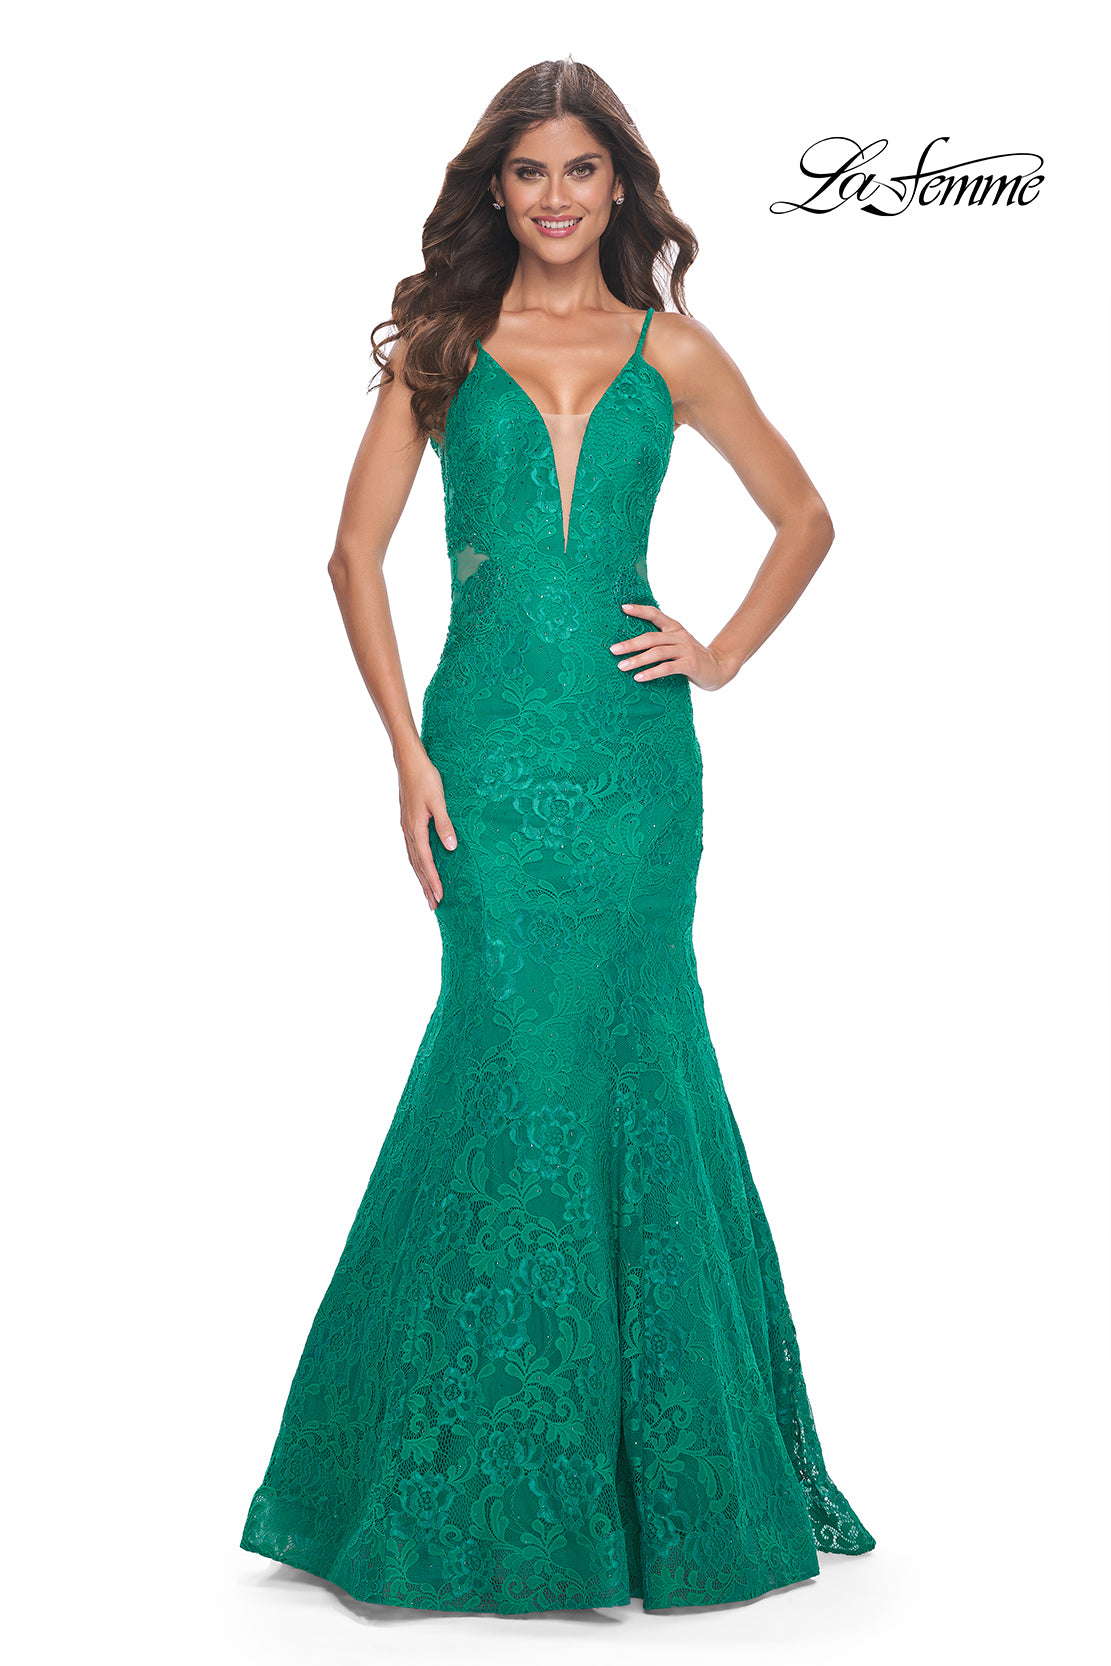 La-Femme-32315-Plunging-Neckline-Low-Back-Corset-Lace-Mermaid-Fitted-Jade-Evening-Dress-B-Chic-Fashions-Prom-Dress